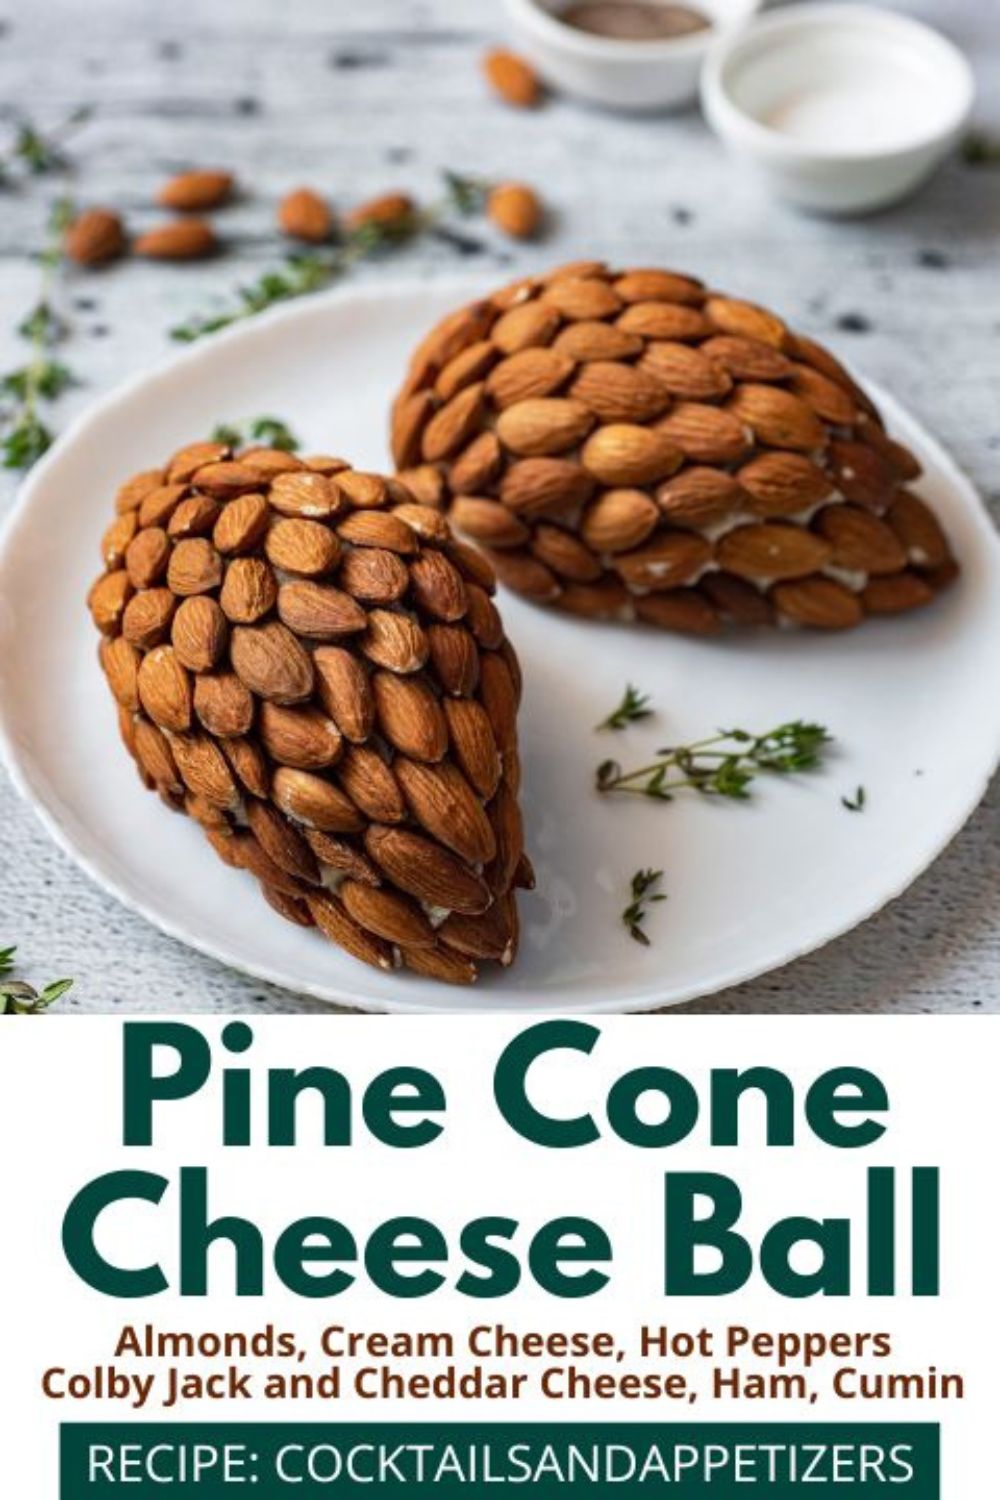 Pine Cone cheese balls sit on a white plate with herbs sprinkled around.